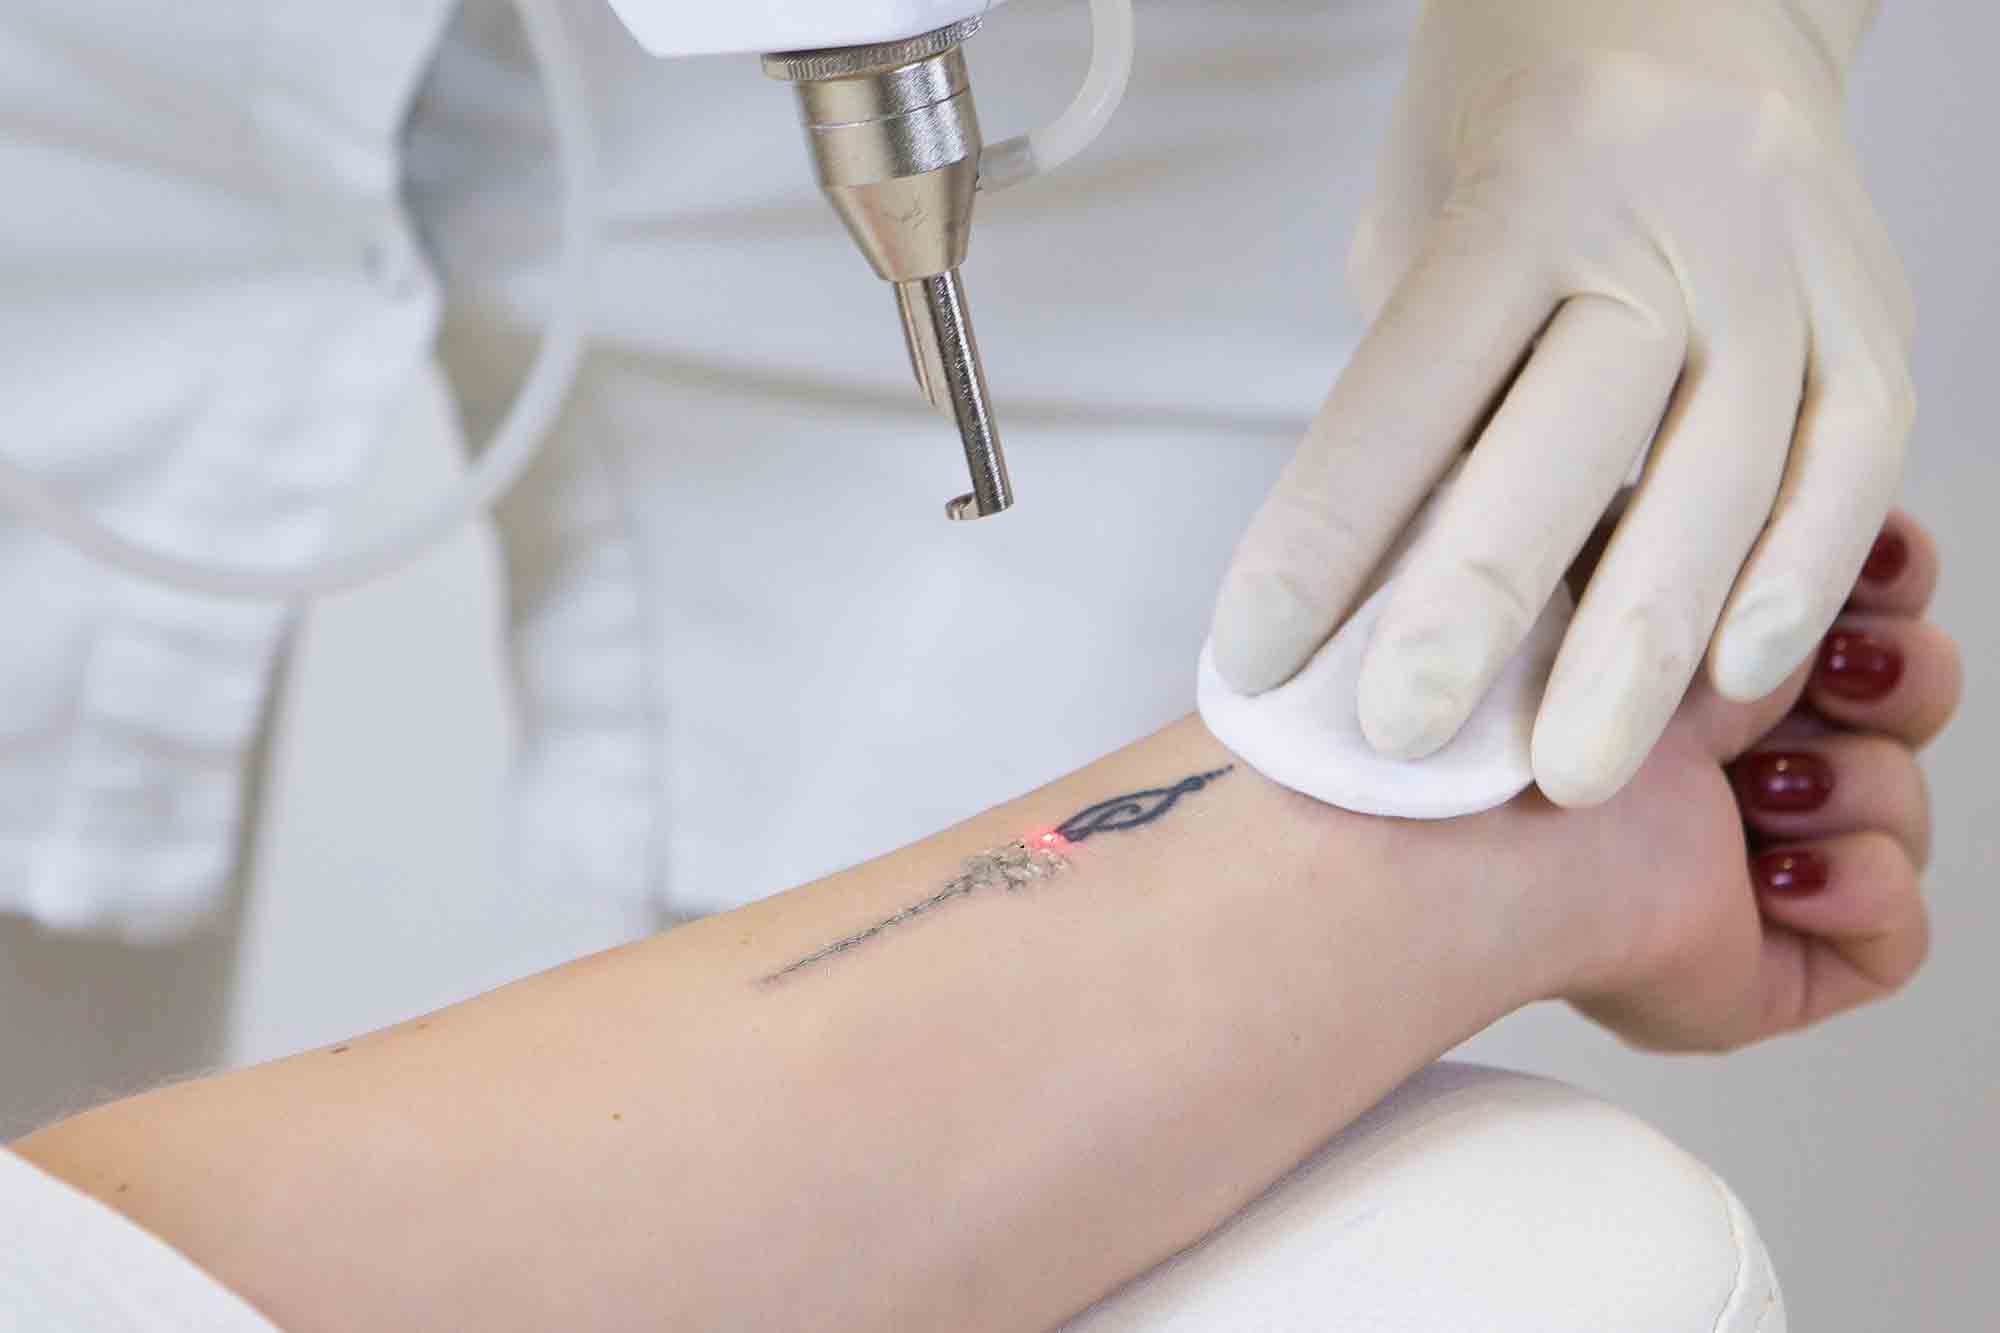 How Much Does Laser Tattoo Removal Cost?